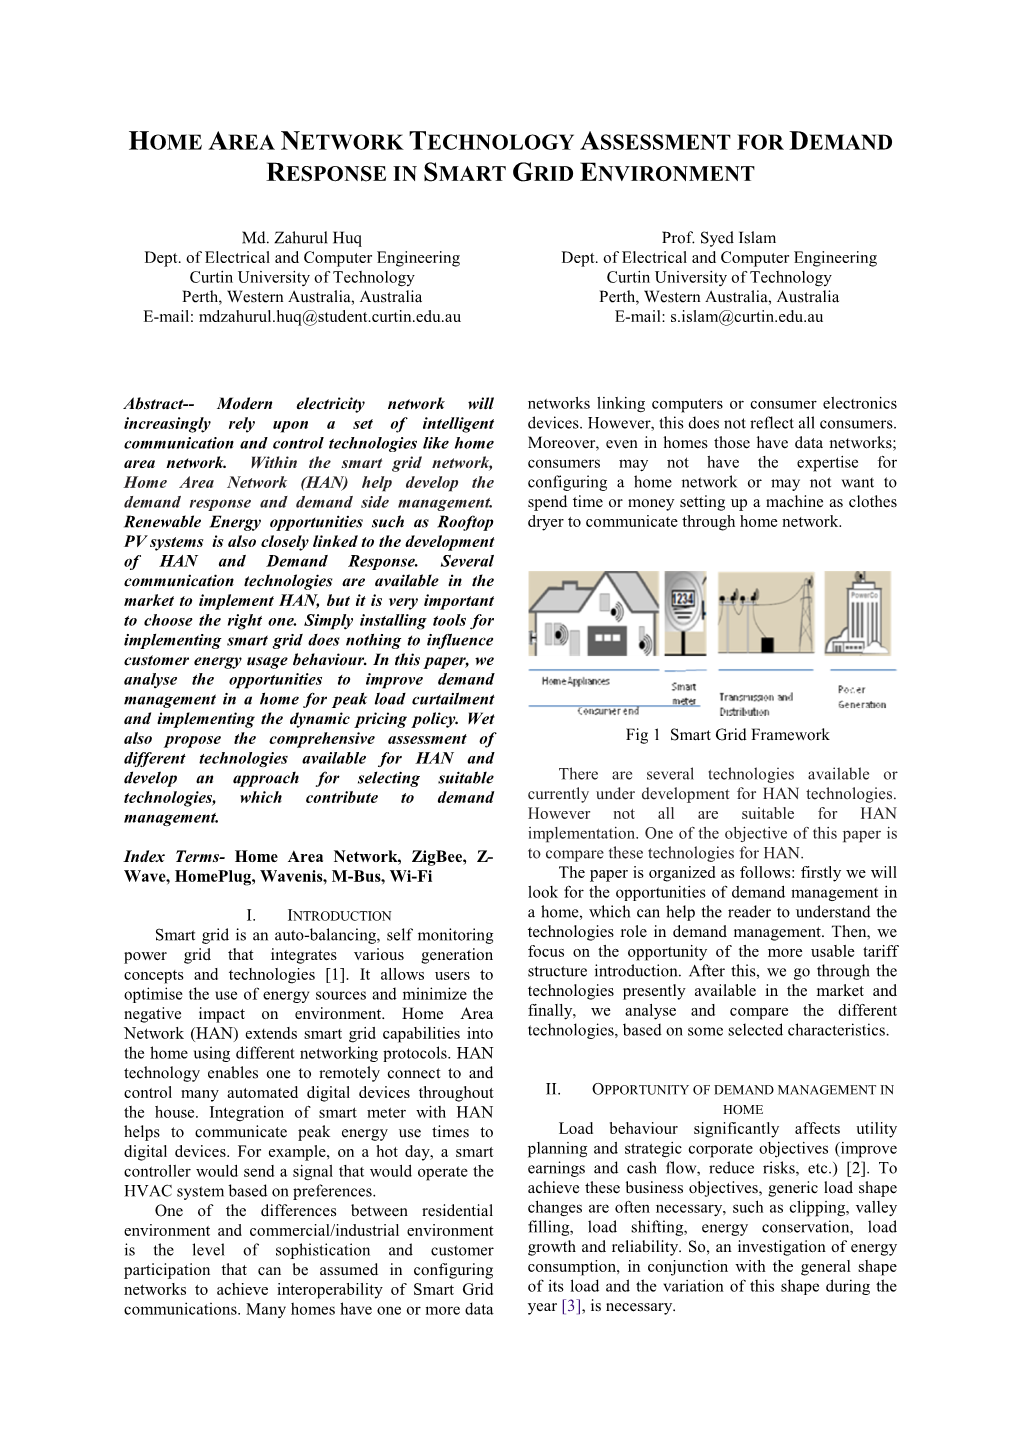 Home Area Network Technology Assessment for Demand Response in Smart Grid Environment